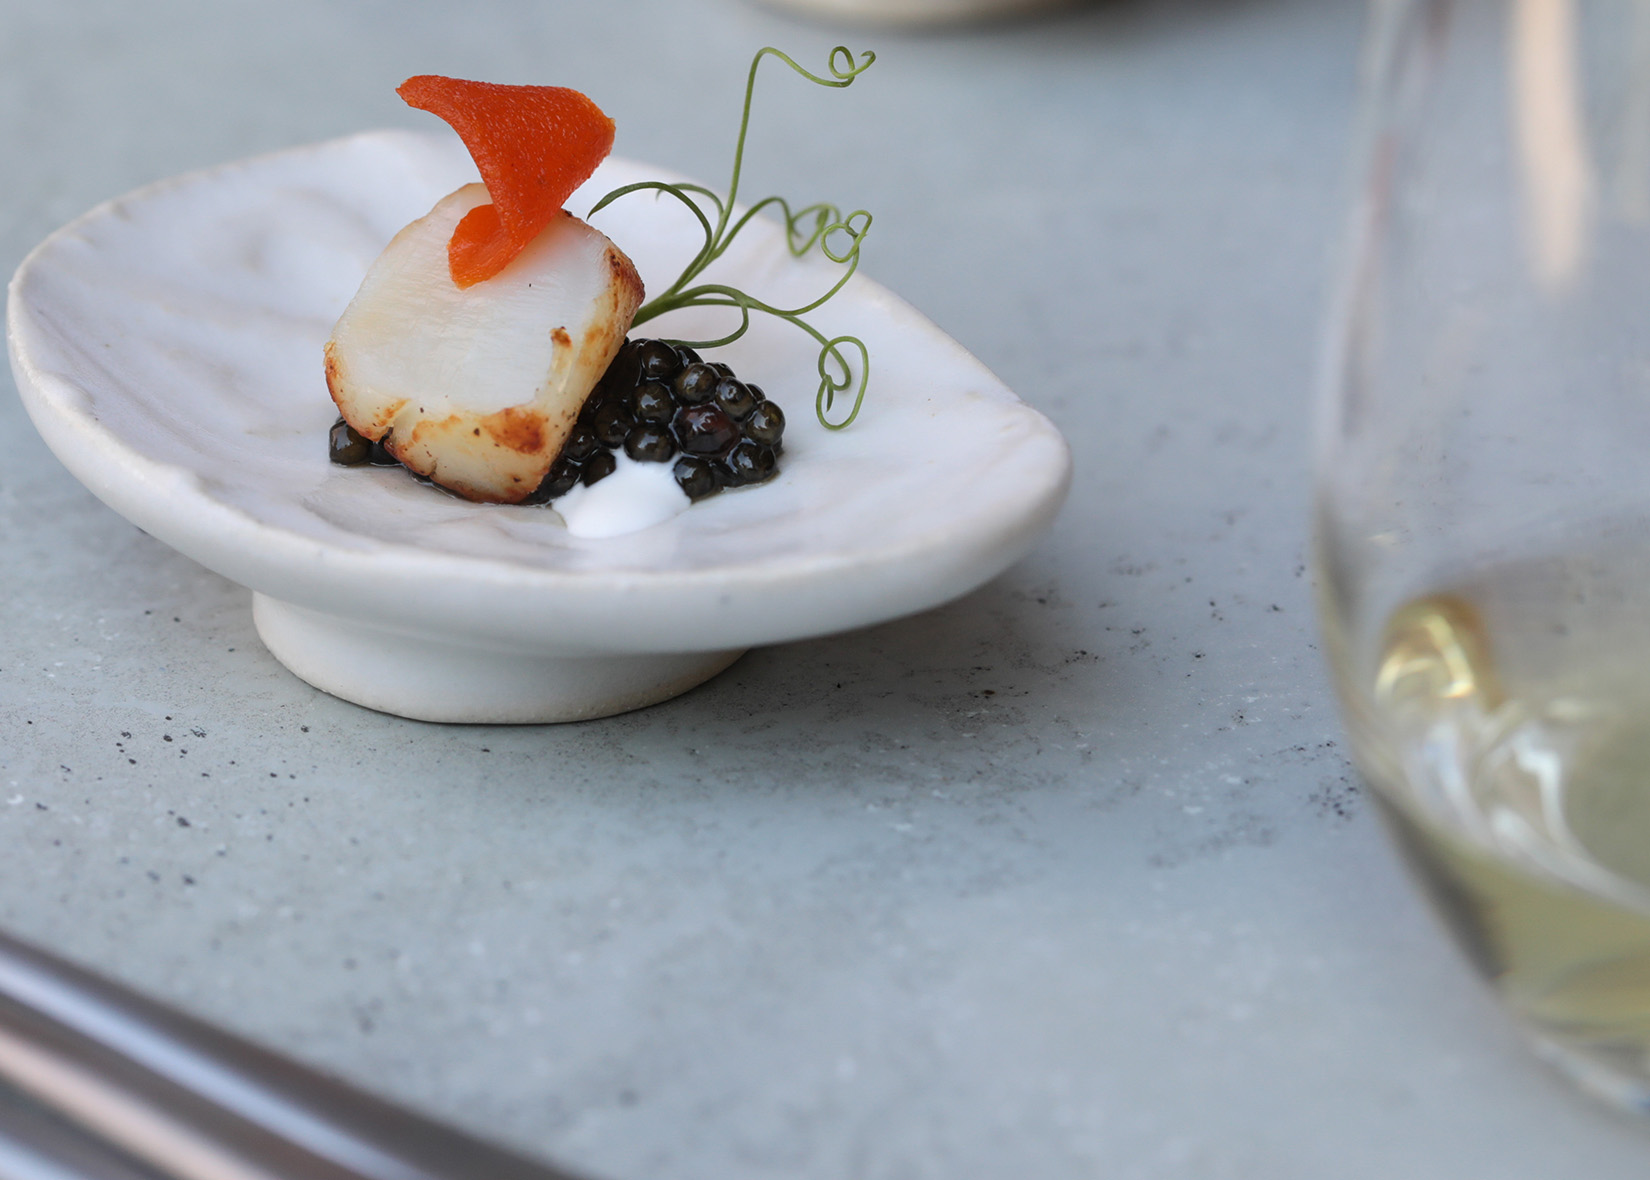 Bay scallop with pickled persimmon skin and caviar on dish next to wine glass